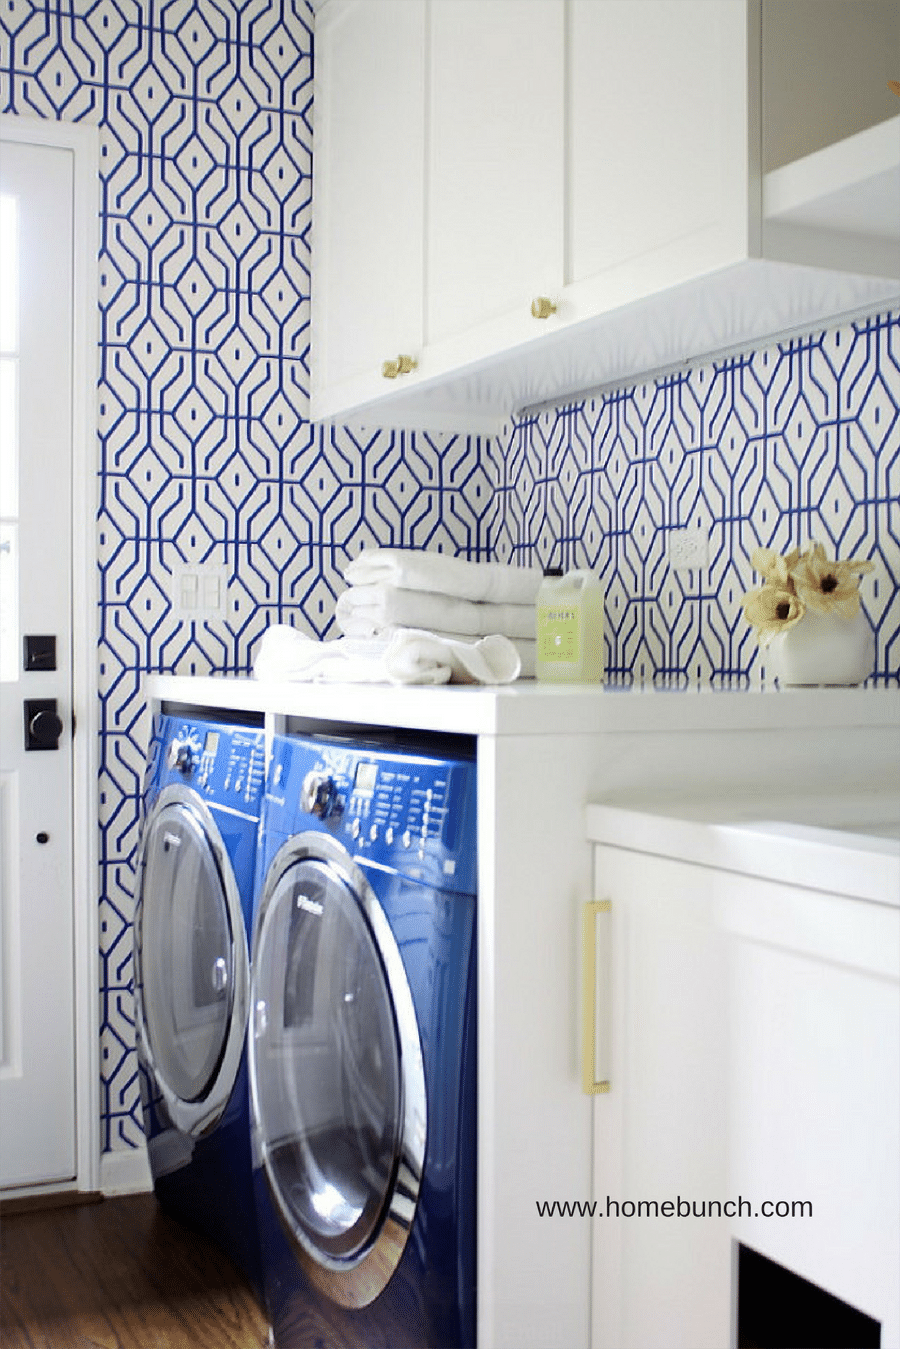 Problem 7 - Bold wallpaper in a custom laundry room cabinet design | Innovate Home Org #laundryroom #storageRoom #funwallpaper #laundryroomwallpaper